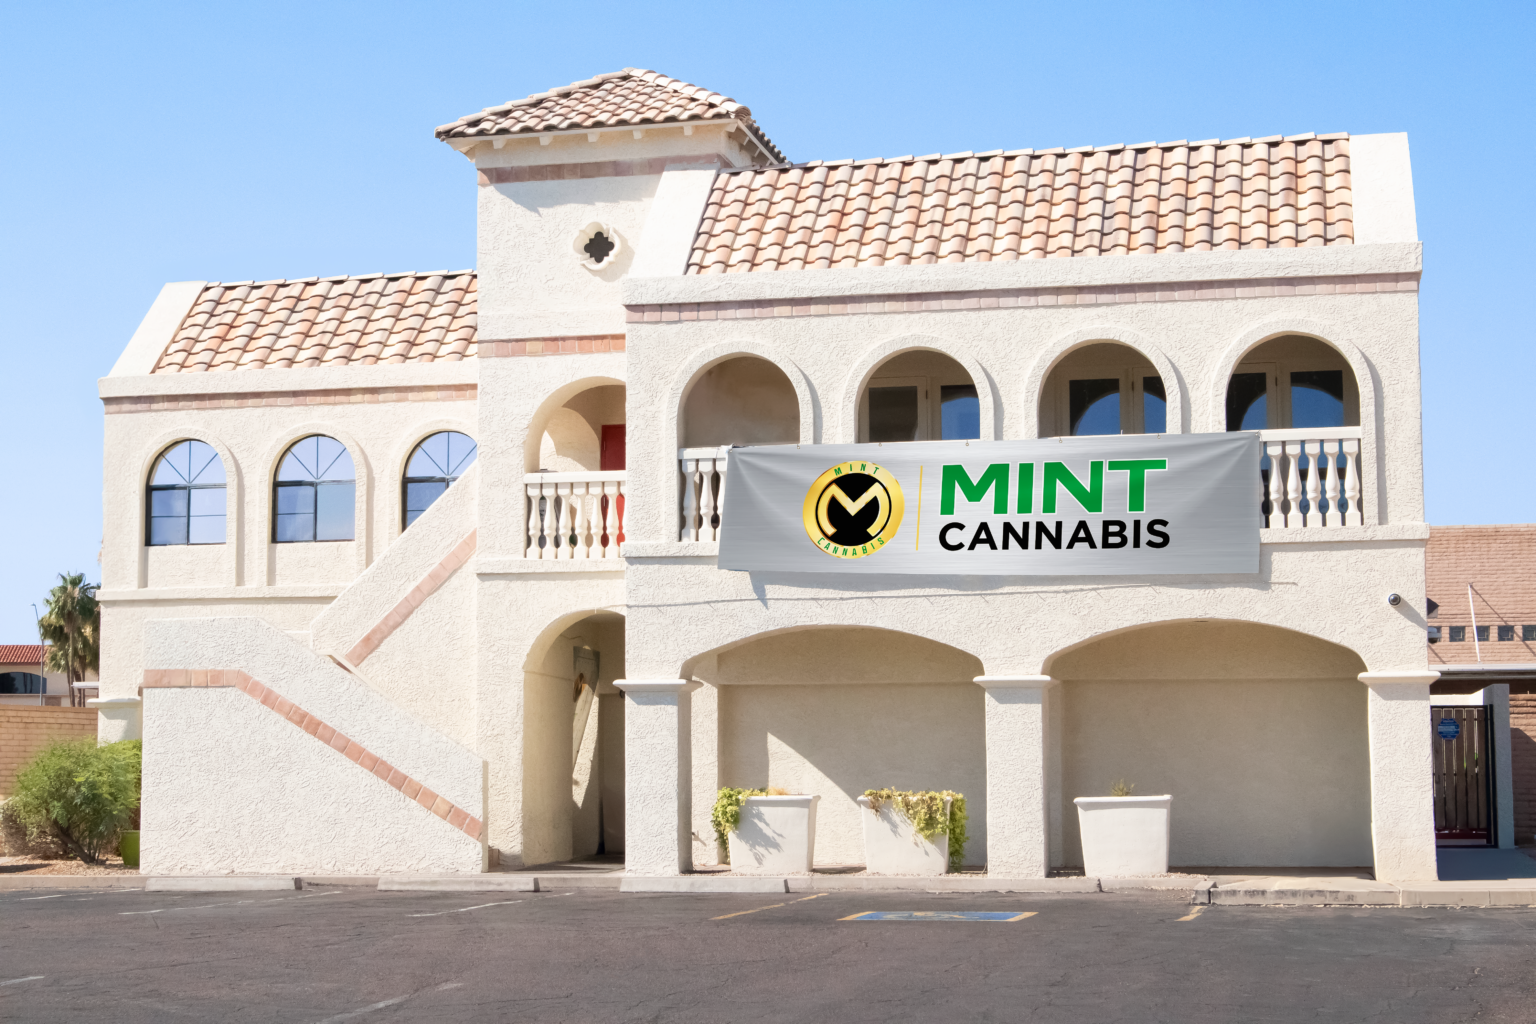 The Mint Cannabis dispensary located in Scottsdale, AZ.